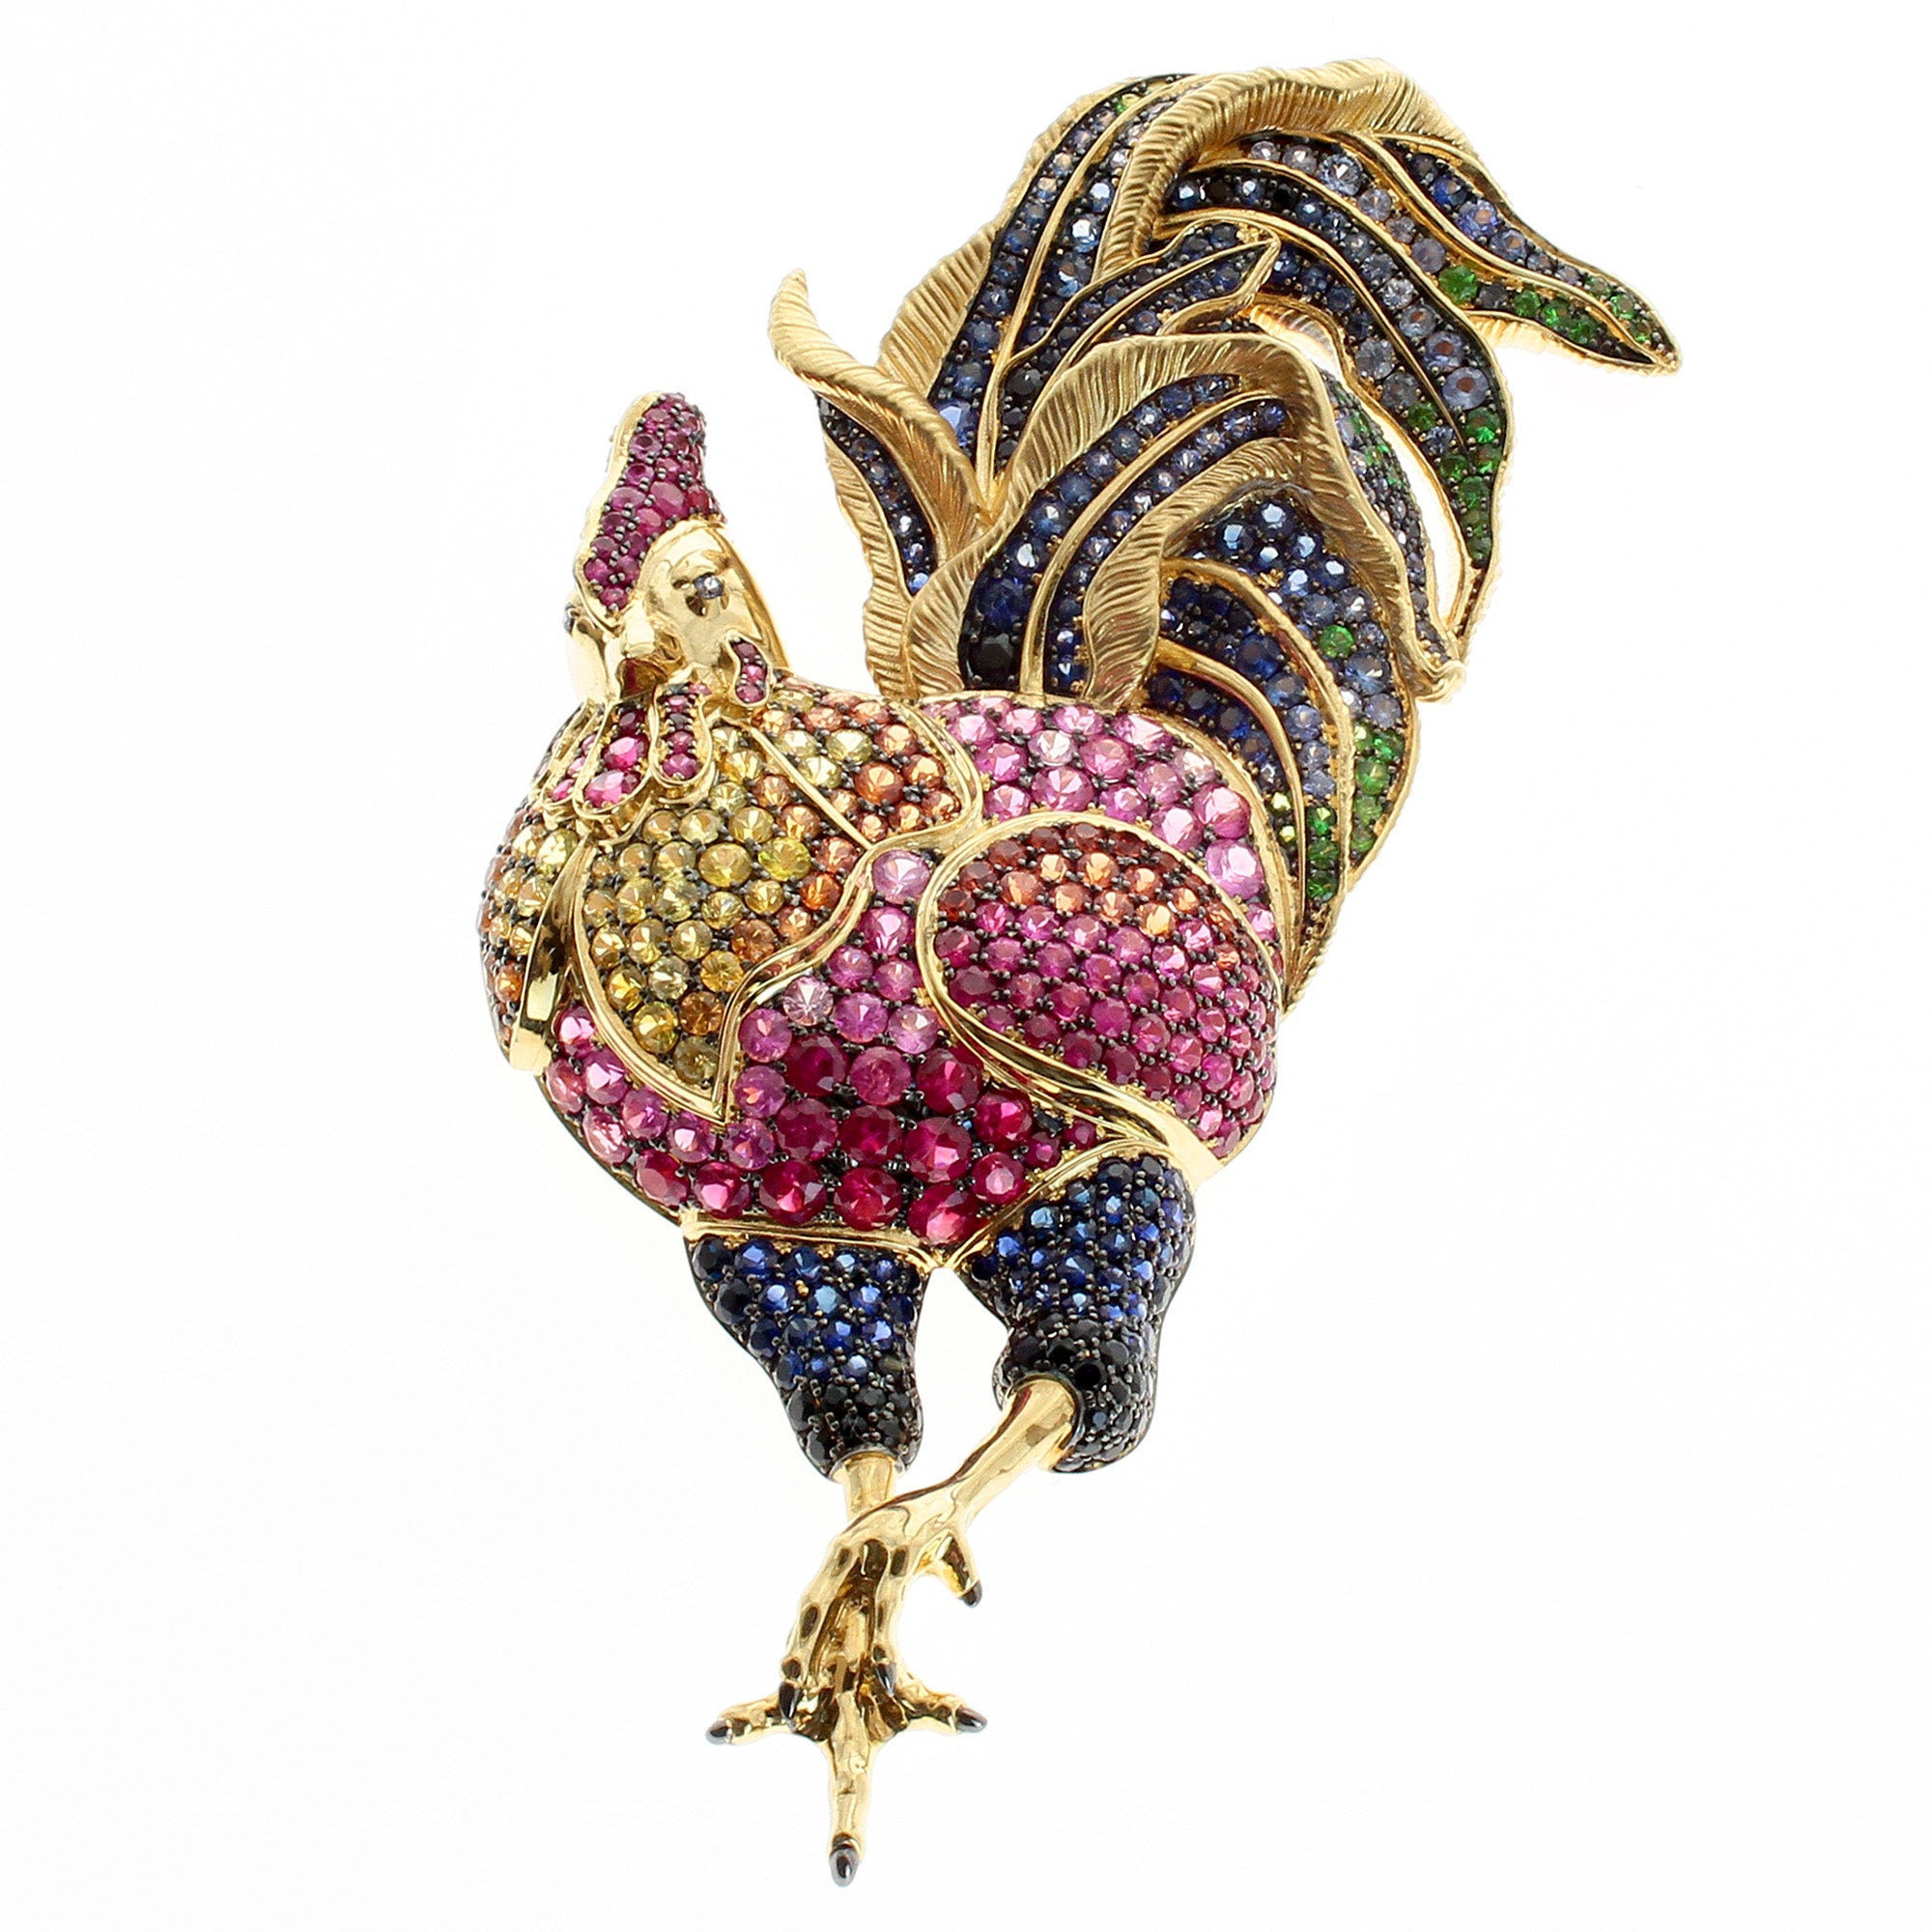 Brs 0173-0, 18K Yellow Gold, Multi-Color Sapphires Rooster Brooch